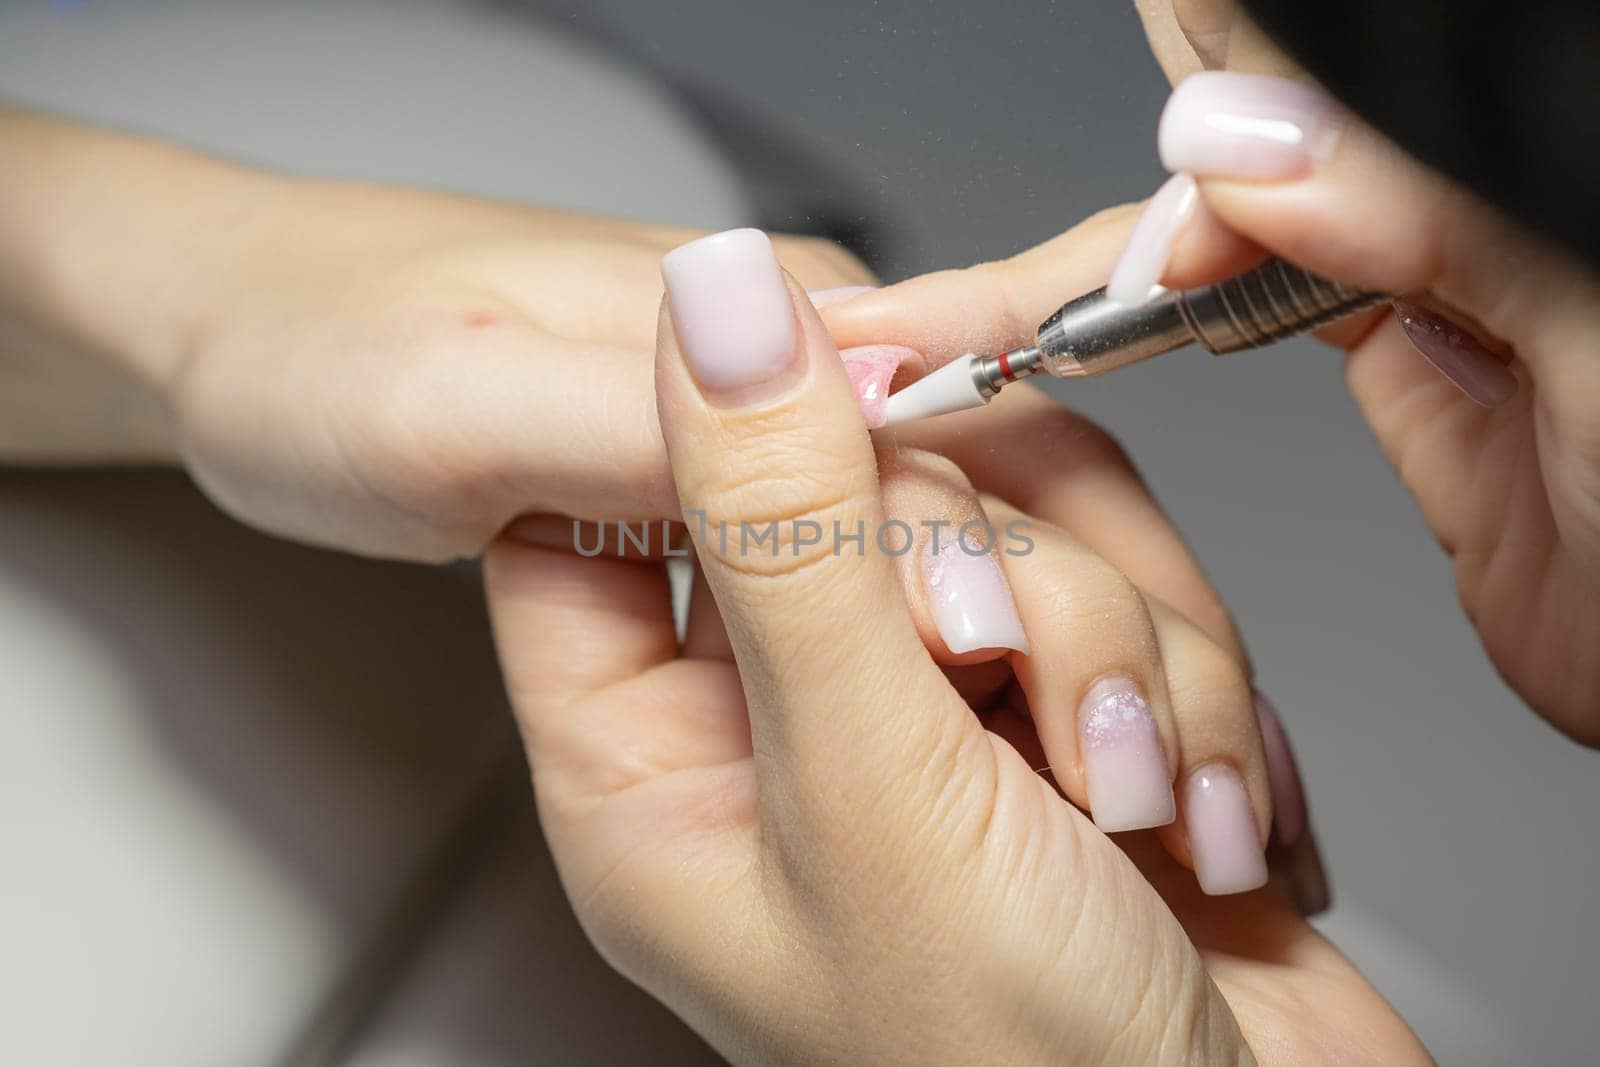 Female hands and tools for manicure, process of performing manicure in beauty salon. Nail care procedure in a beauty salon. Gloved hands of a skilled manicurist cutting cuticles. Concept spa body care